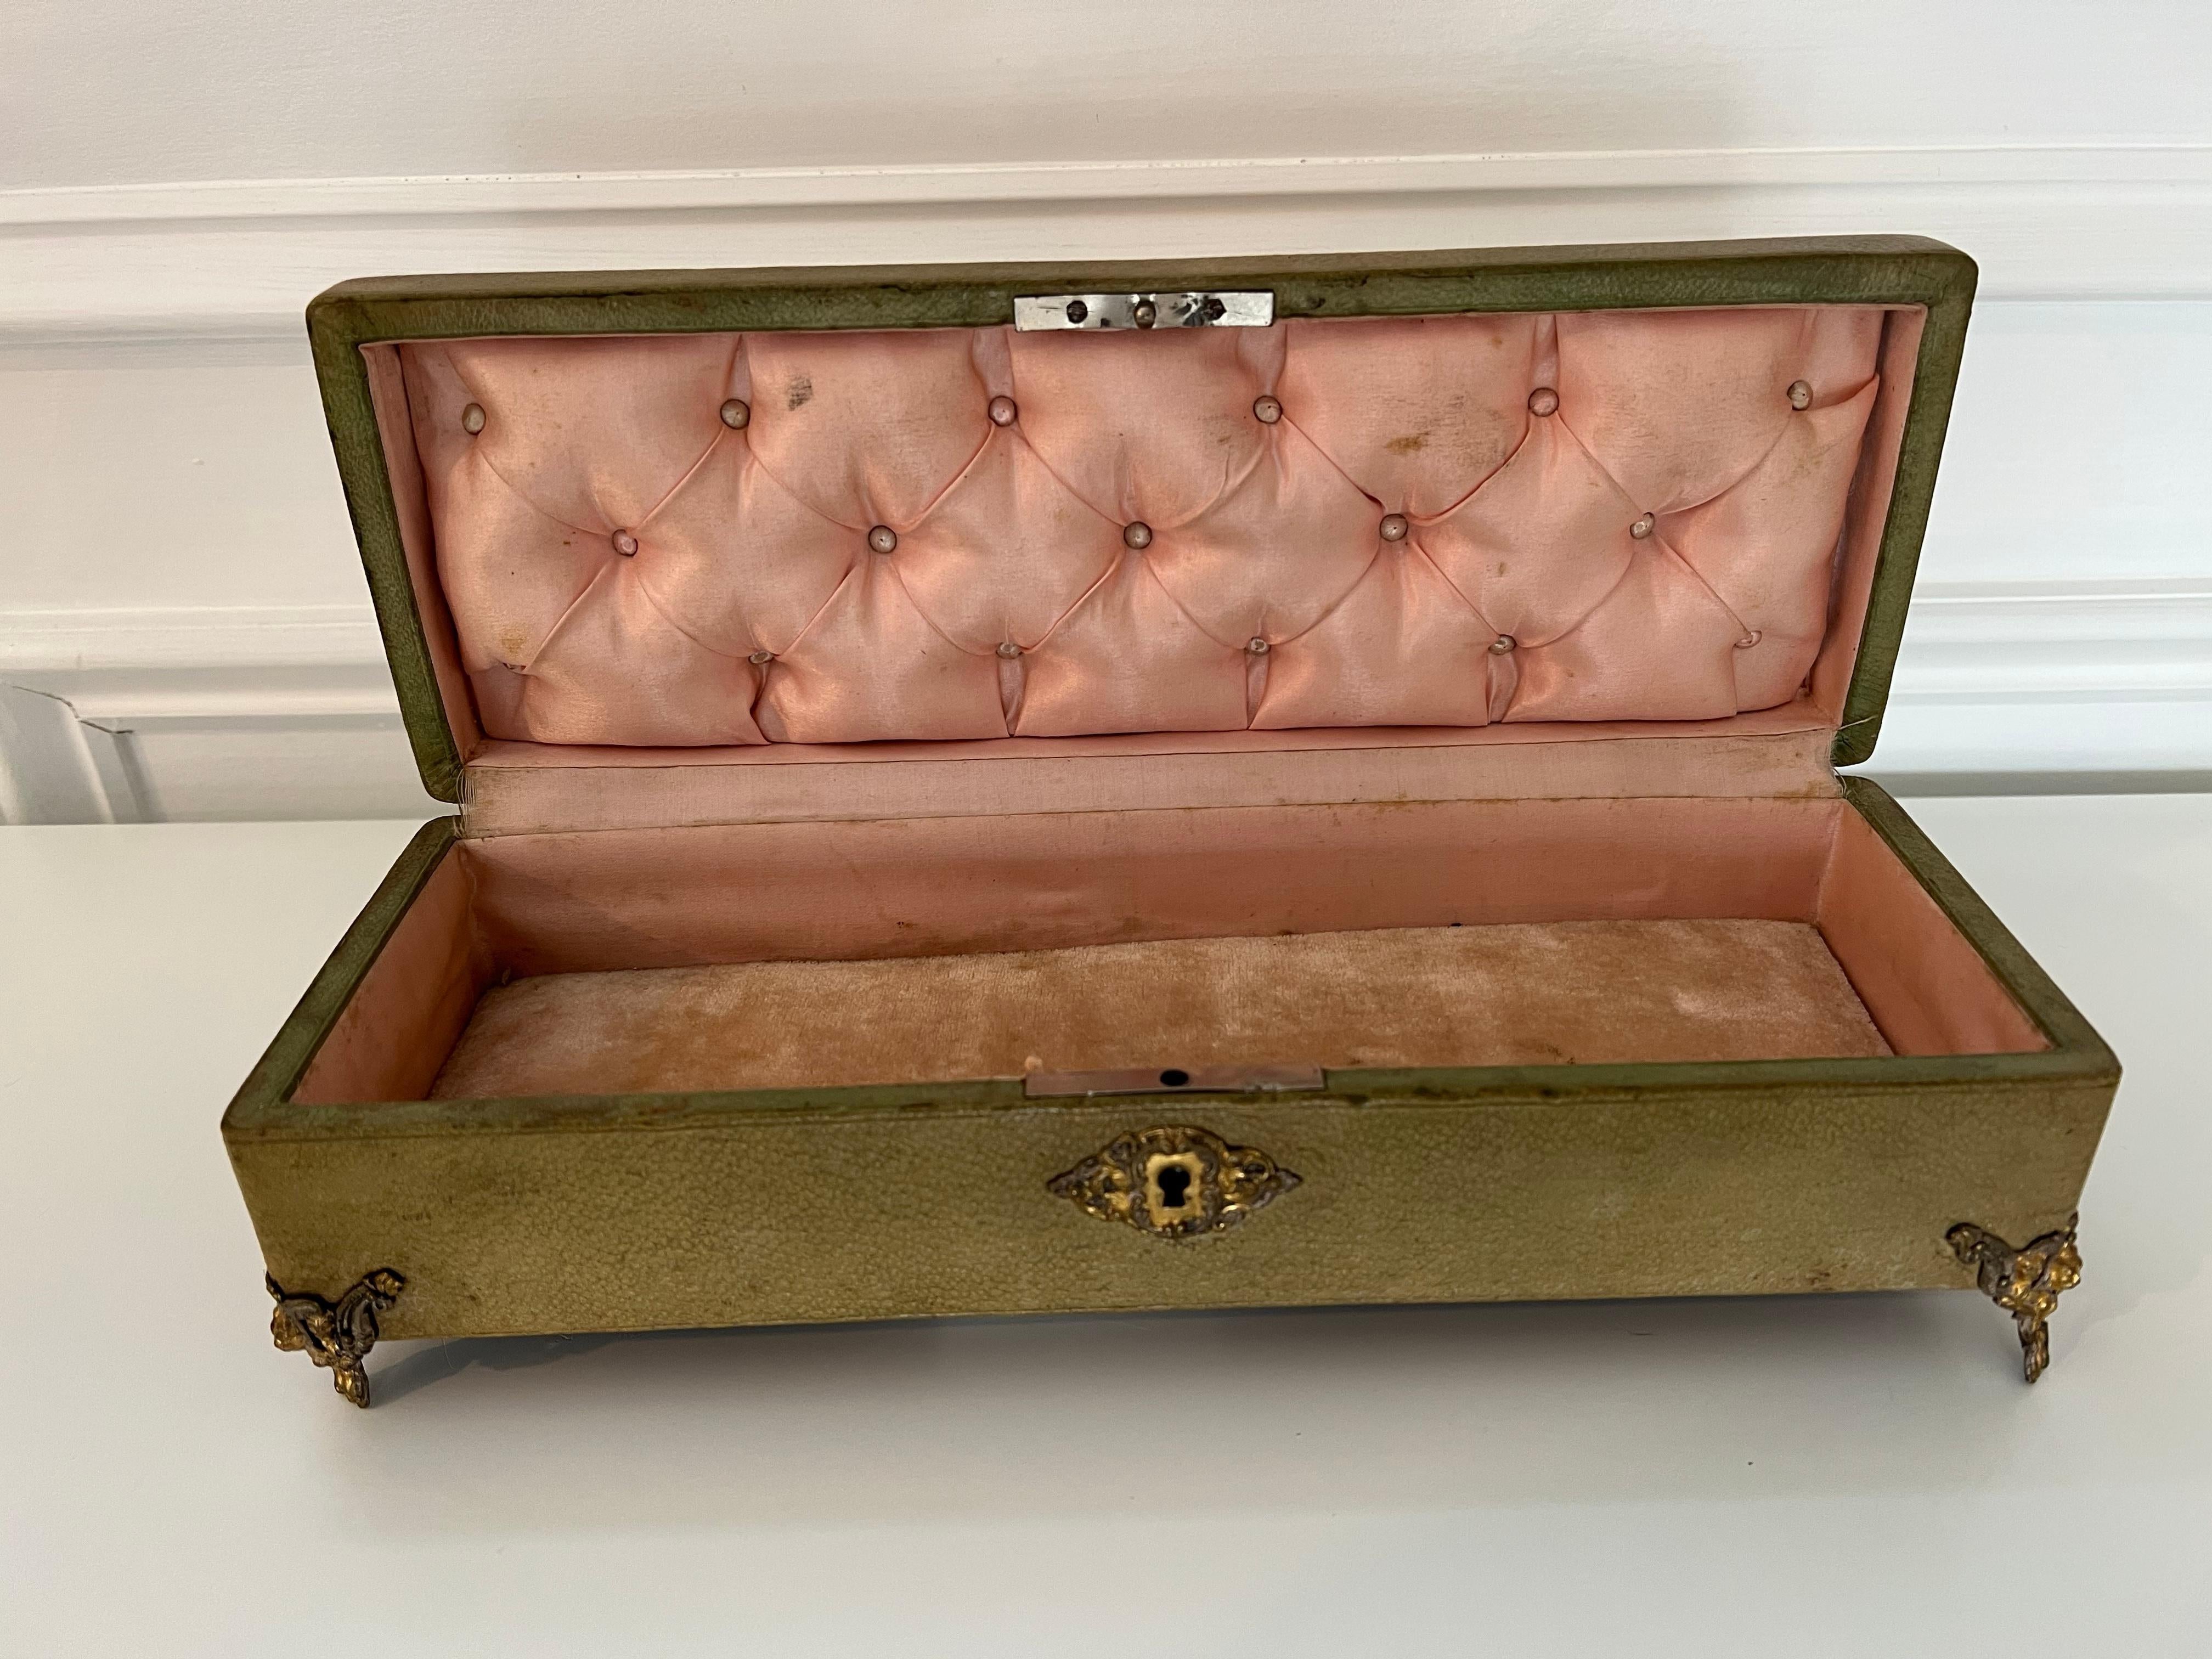 Mid-19th Century French Green Leather Glove Box with Ormolu and Pink Interior For Sale 7